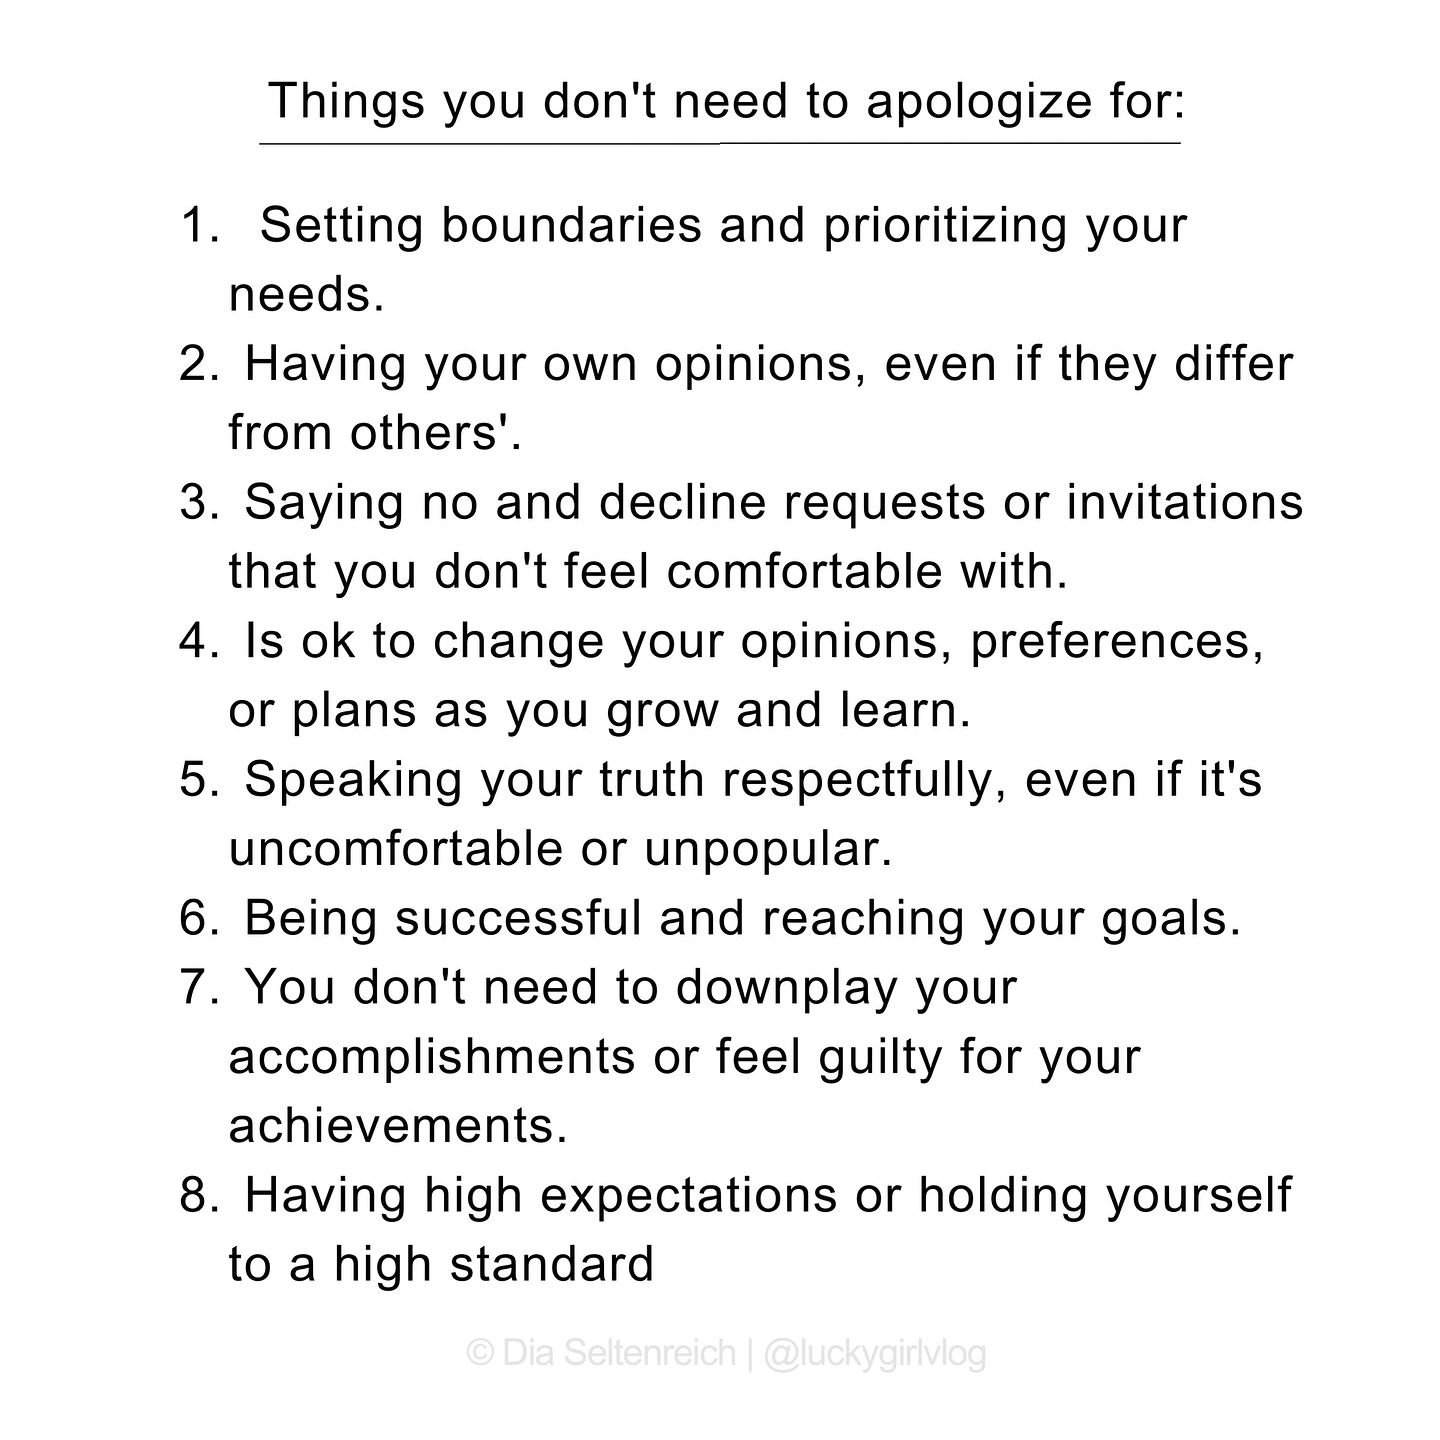 Posted @withregram &bull; @luckygirlvlog You don&rsquo;t owe anyone an apology for being true to yourself and pursuing the life you desire ♡
.
.
.
#celebratehertoo
#unique #independent #besties #womenempowerment #lifestyle #strength #positivevibes
#s